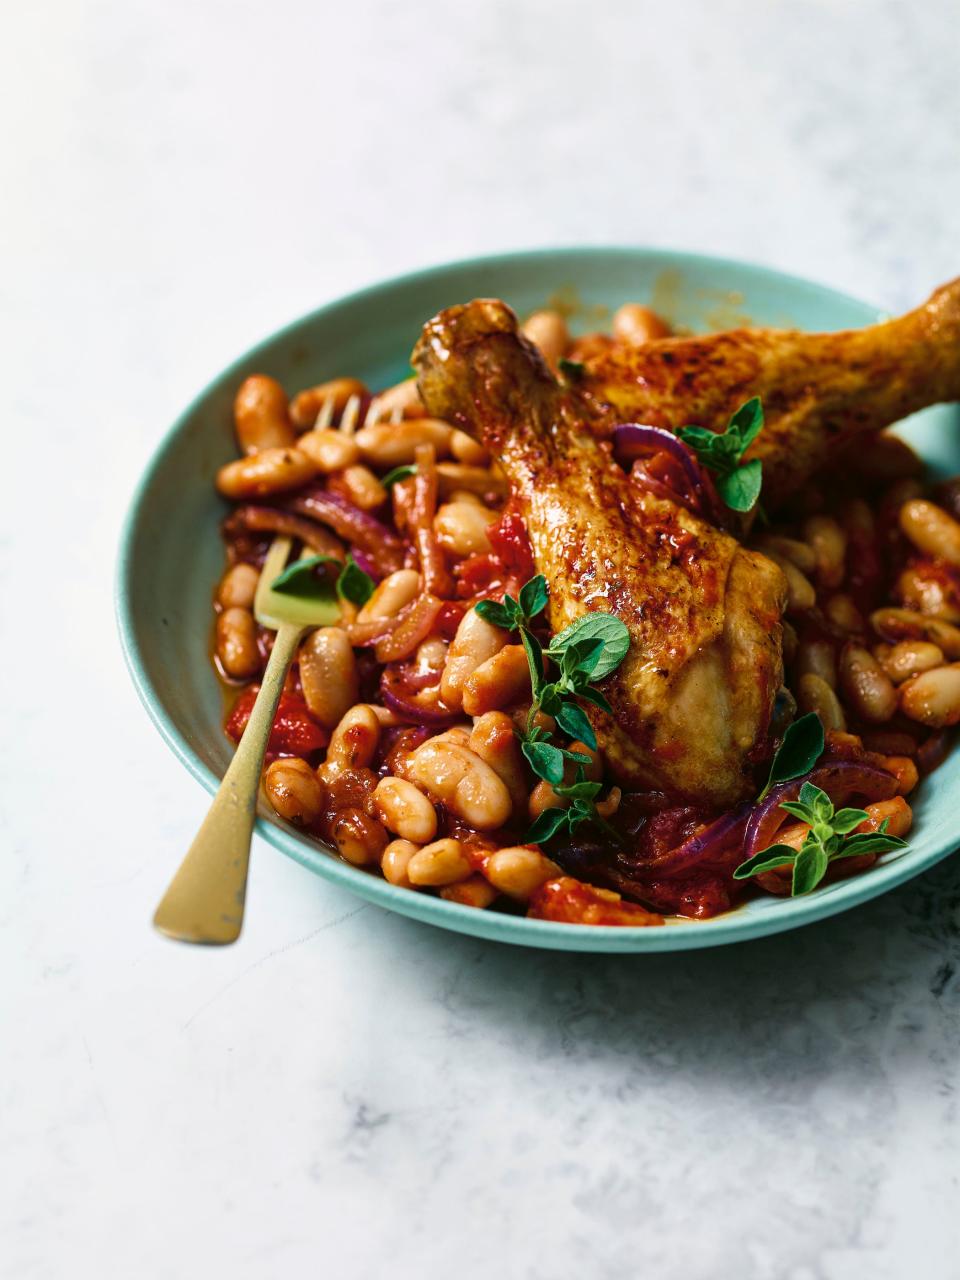 Chicken drumstick cassoulet recipe: How to make this hearty dinner for just £1 | The Independent